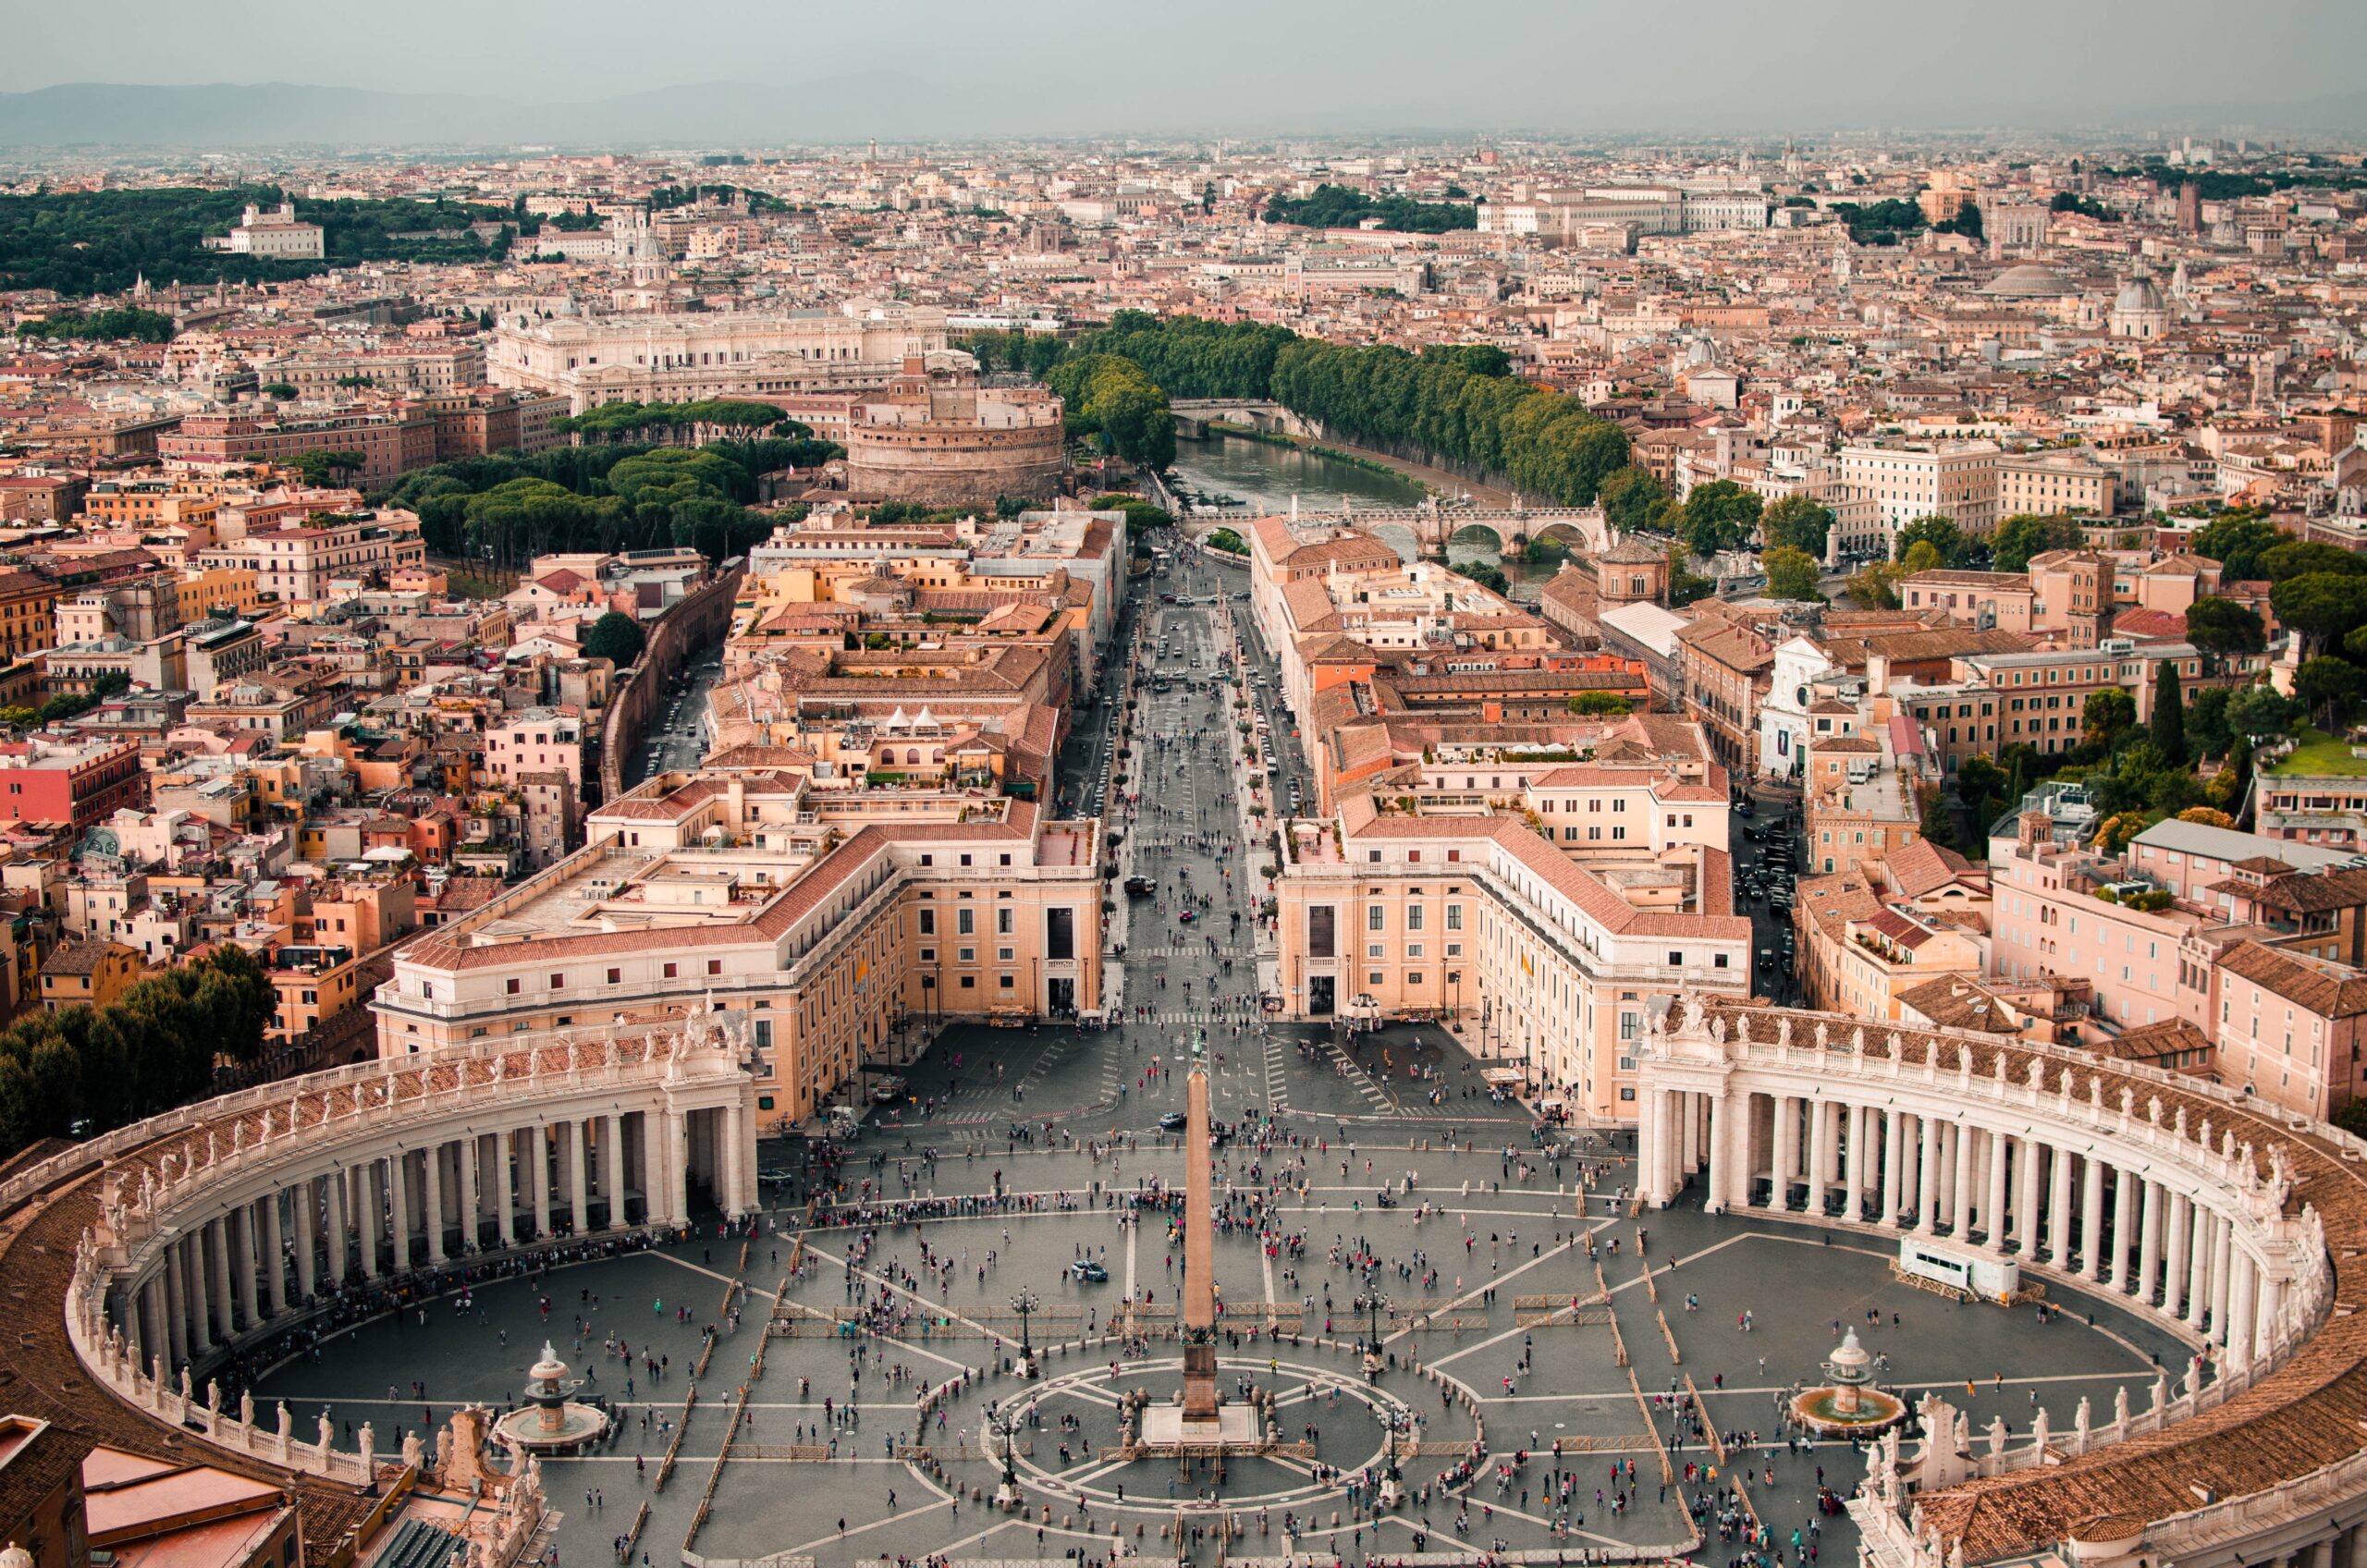 an aerial view of the piazza in Rome